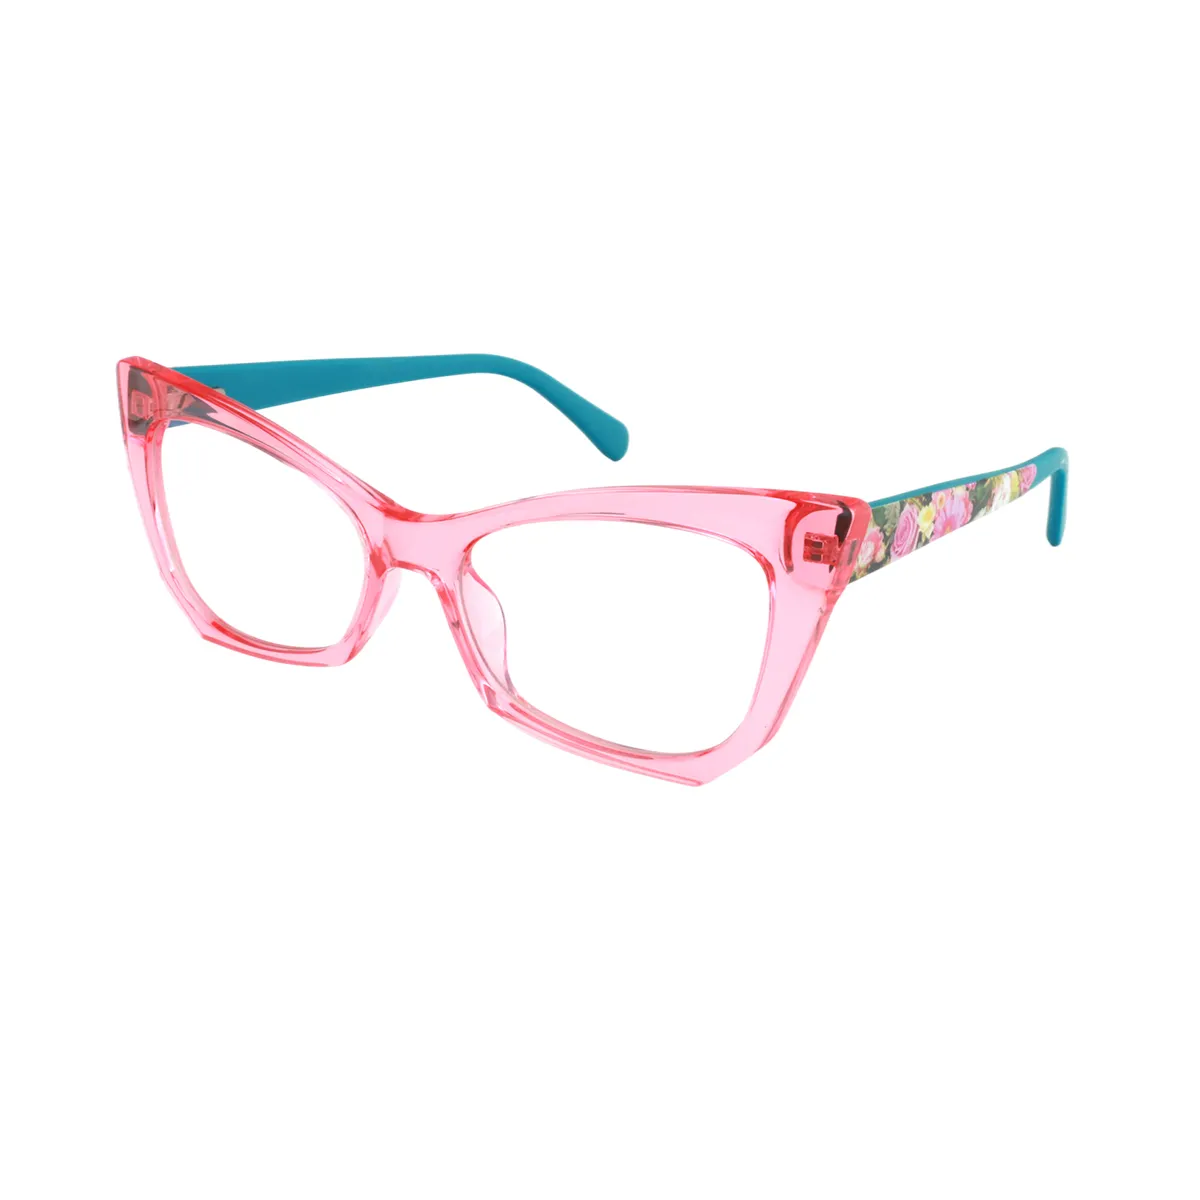 Frederica - Cat-eye Transparent-Pink Glasses for Women